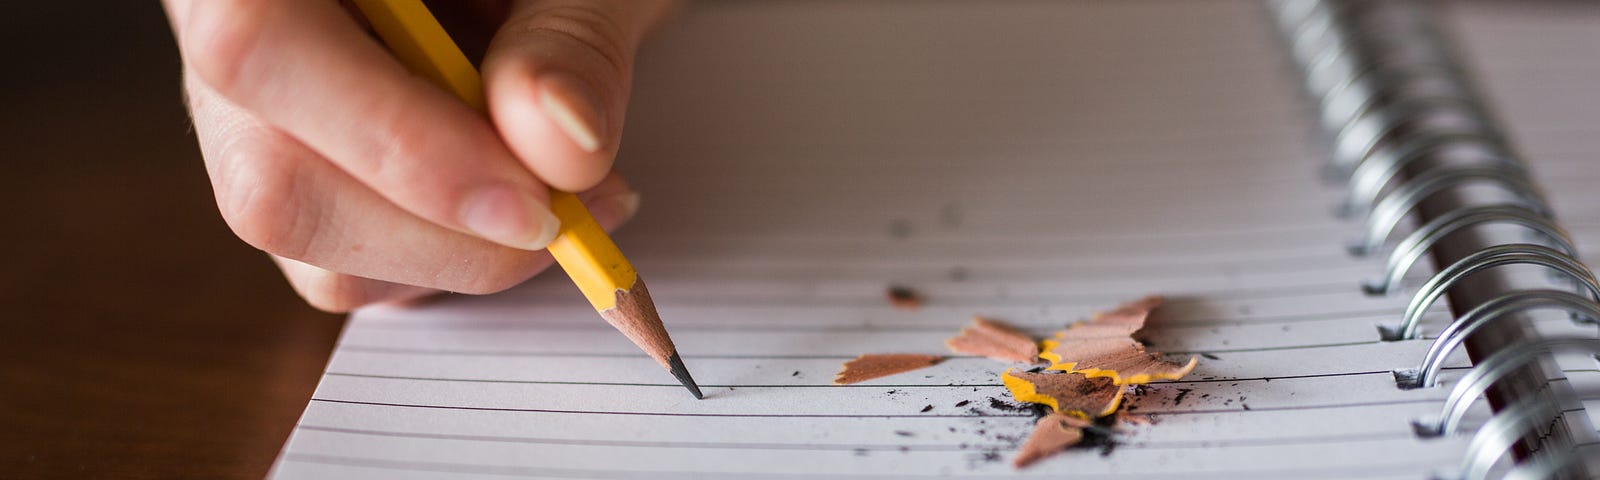 Person’s hand with a pencil writing in a notebook on blank page.